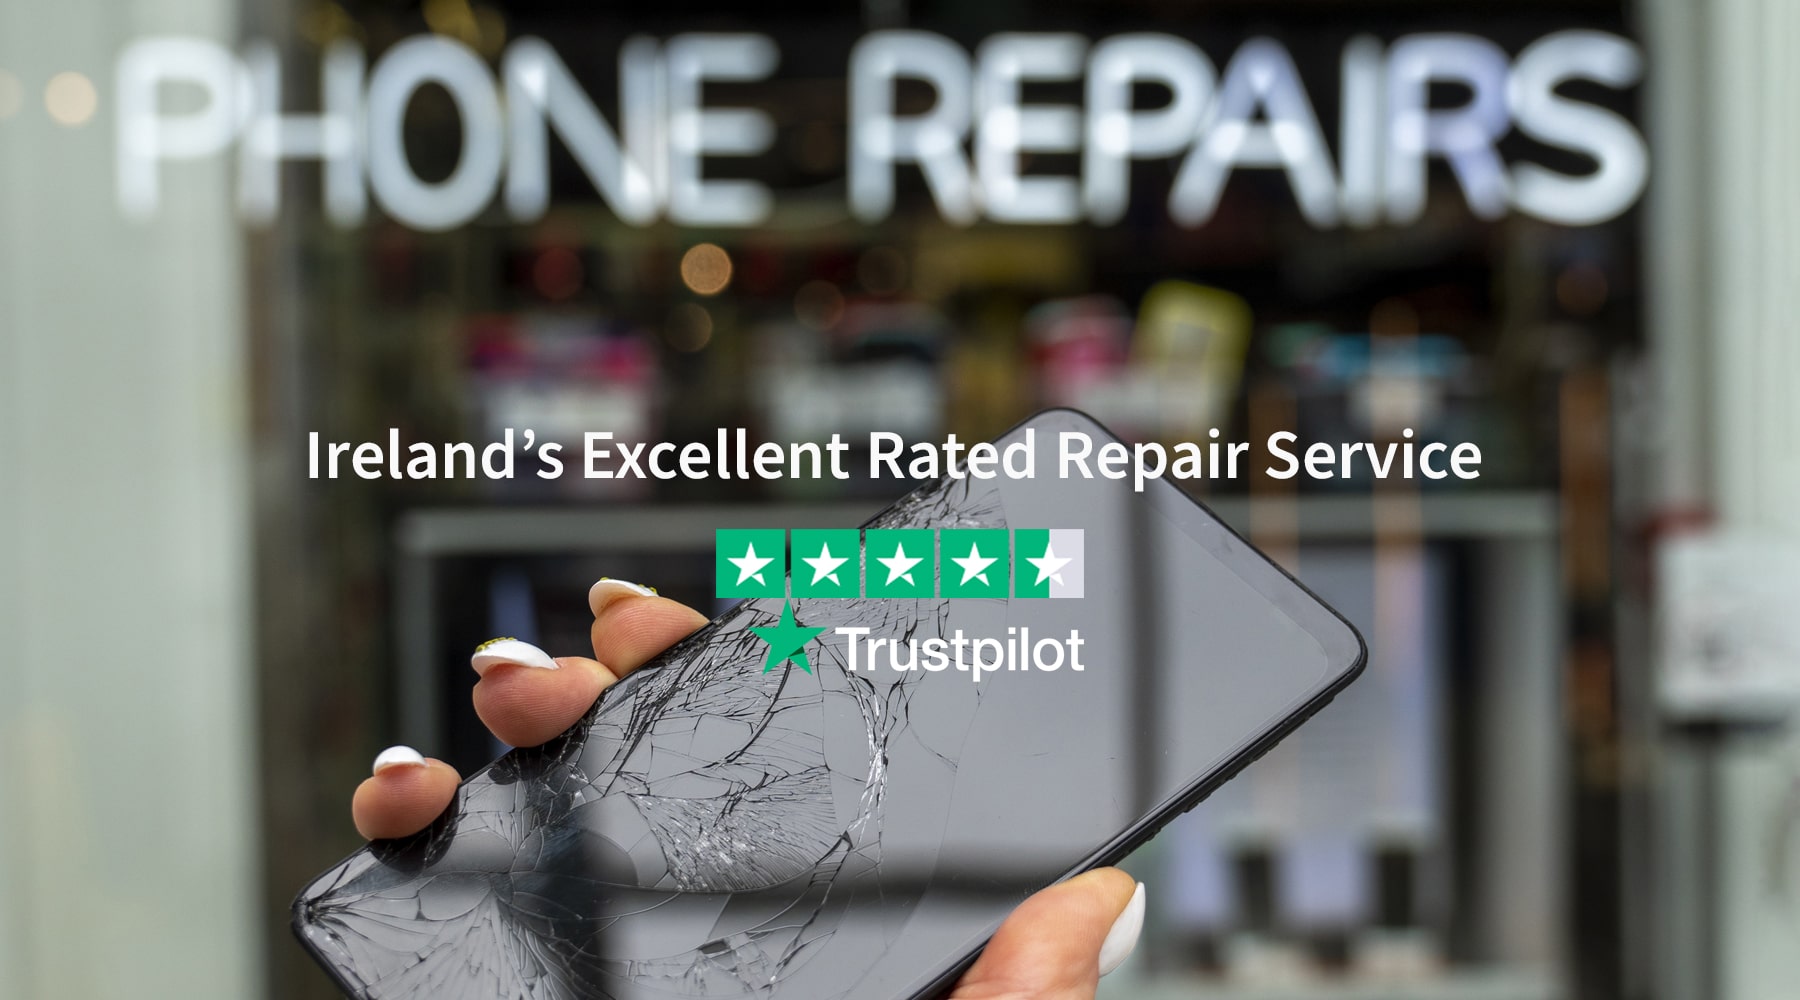 How do you pick your Repairs Service?